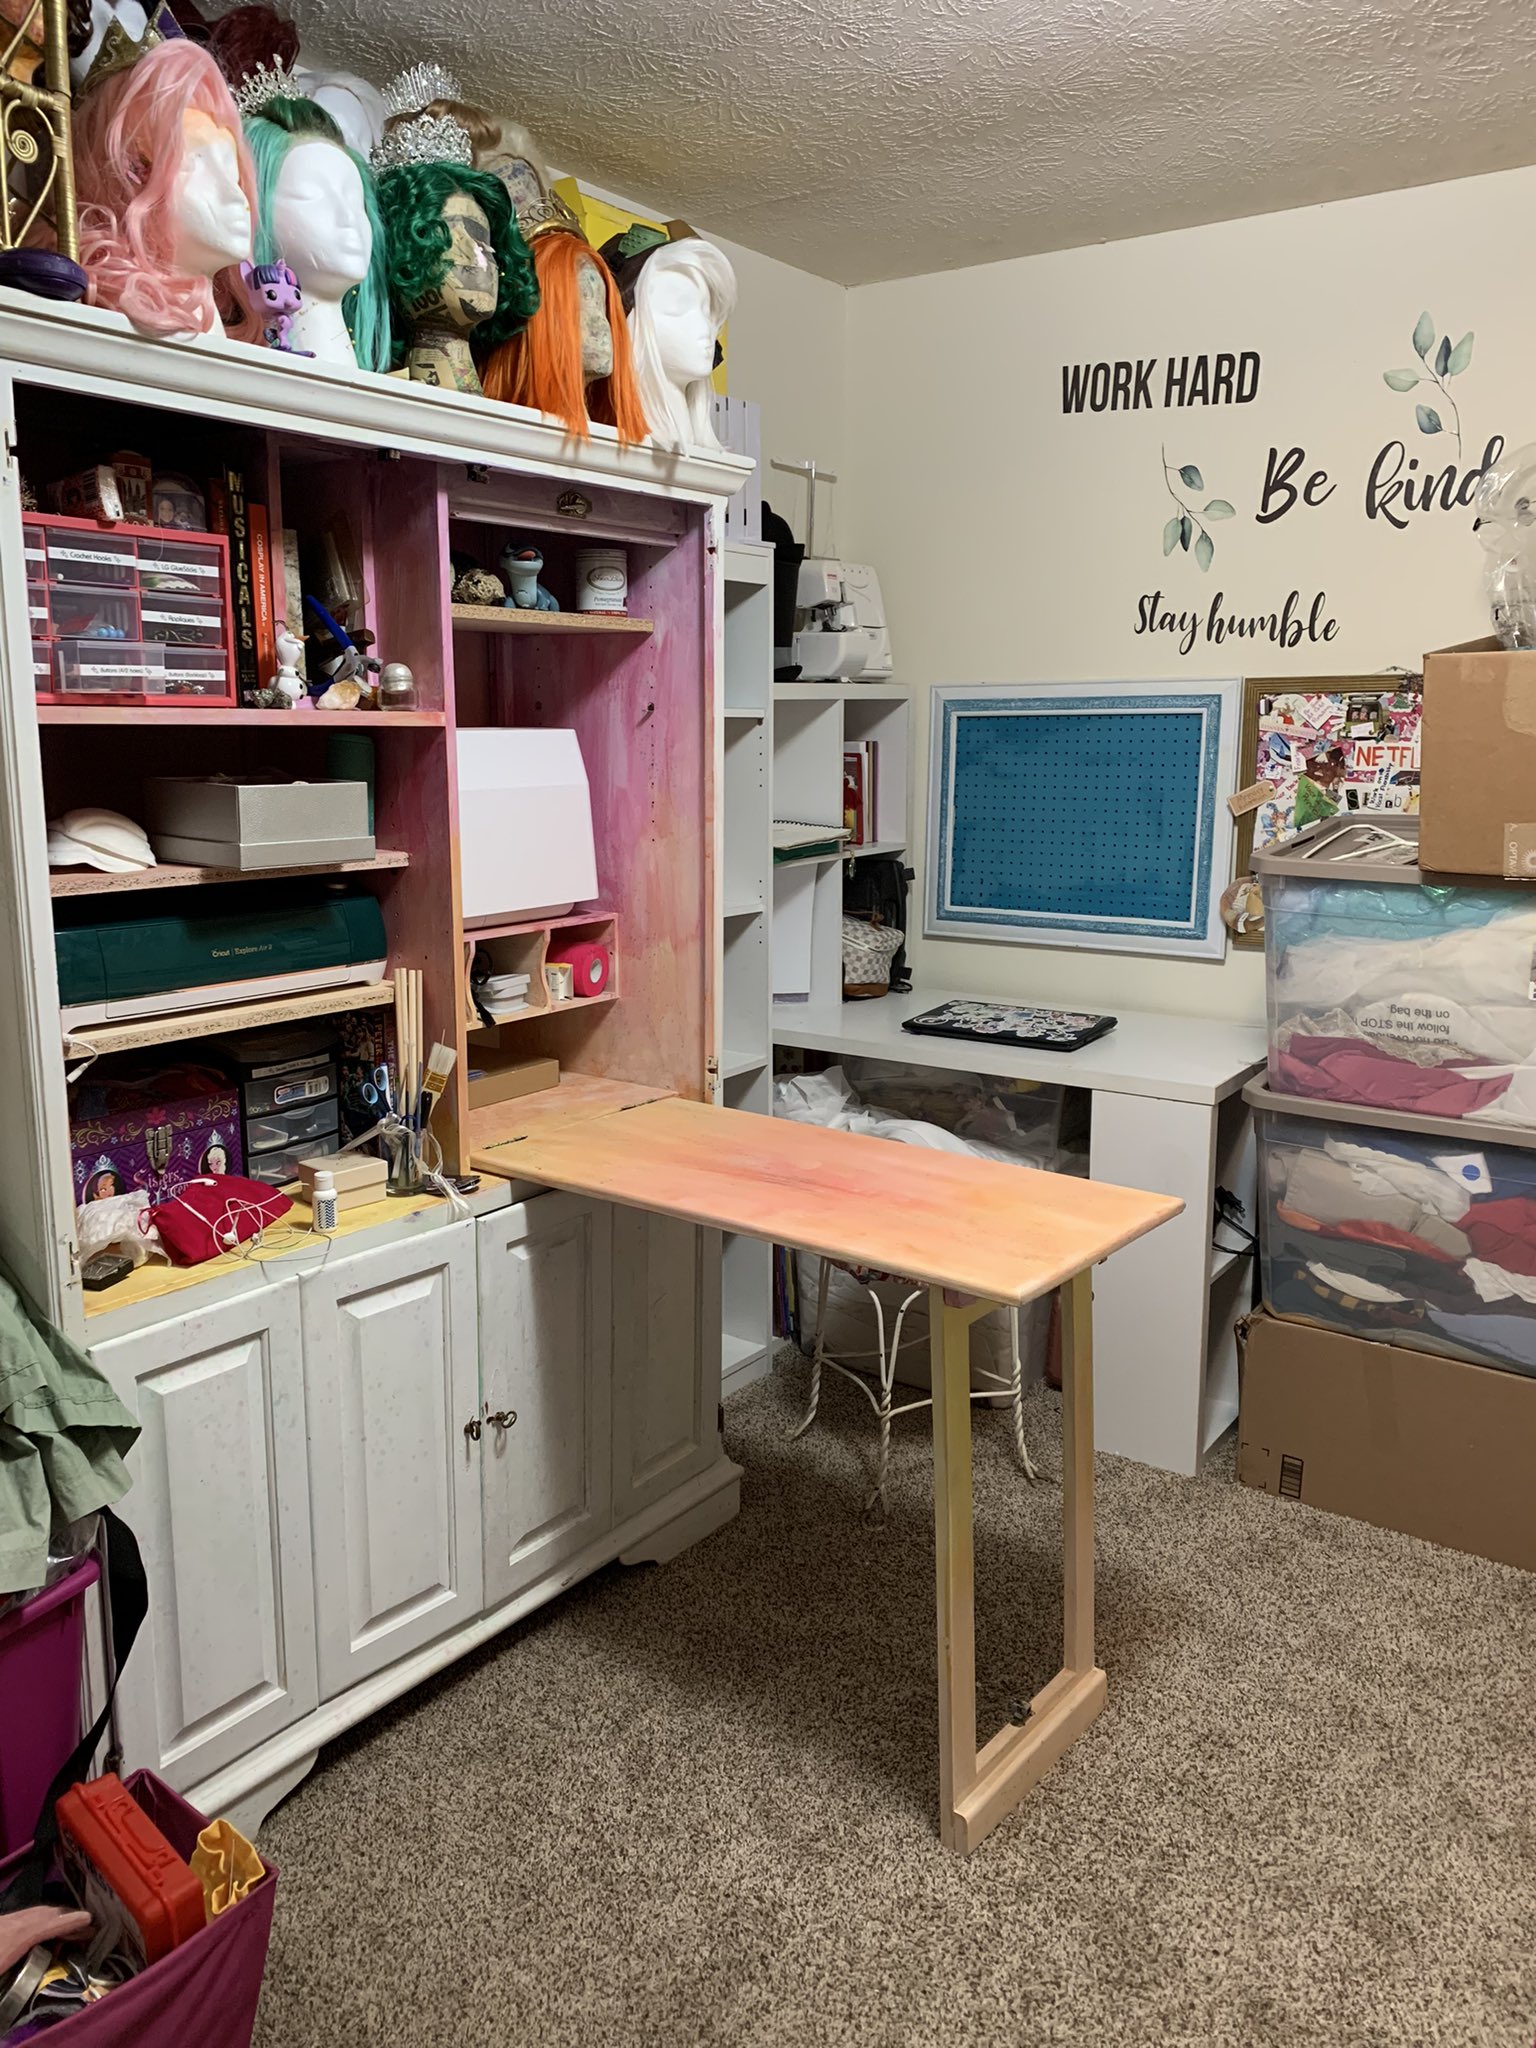 ShelbeanieVO on X: Not done yet, but my organization of my craft room is  coming along! I'm really happy with the usage of space so far! Still have a  ways to go